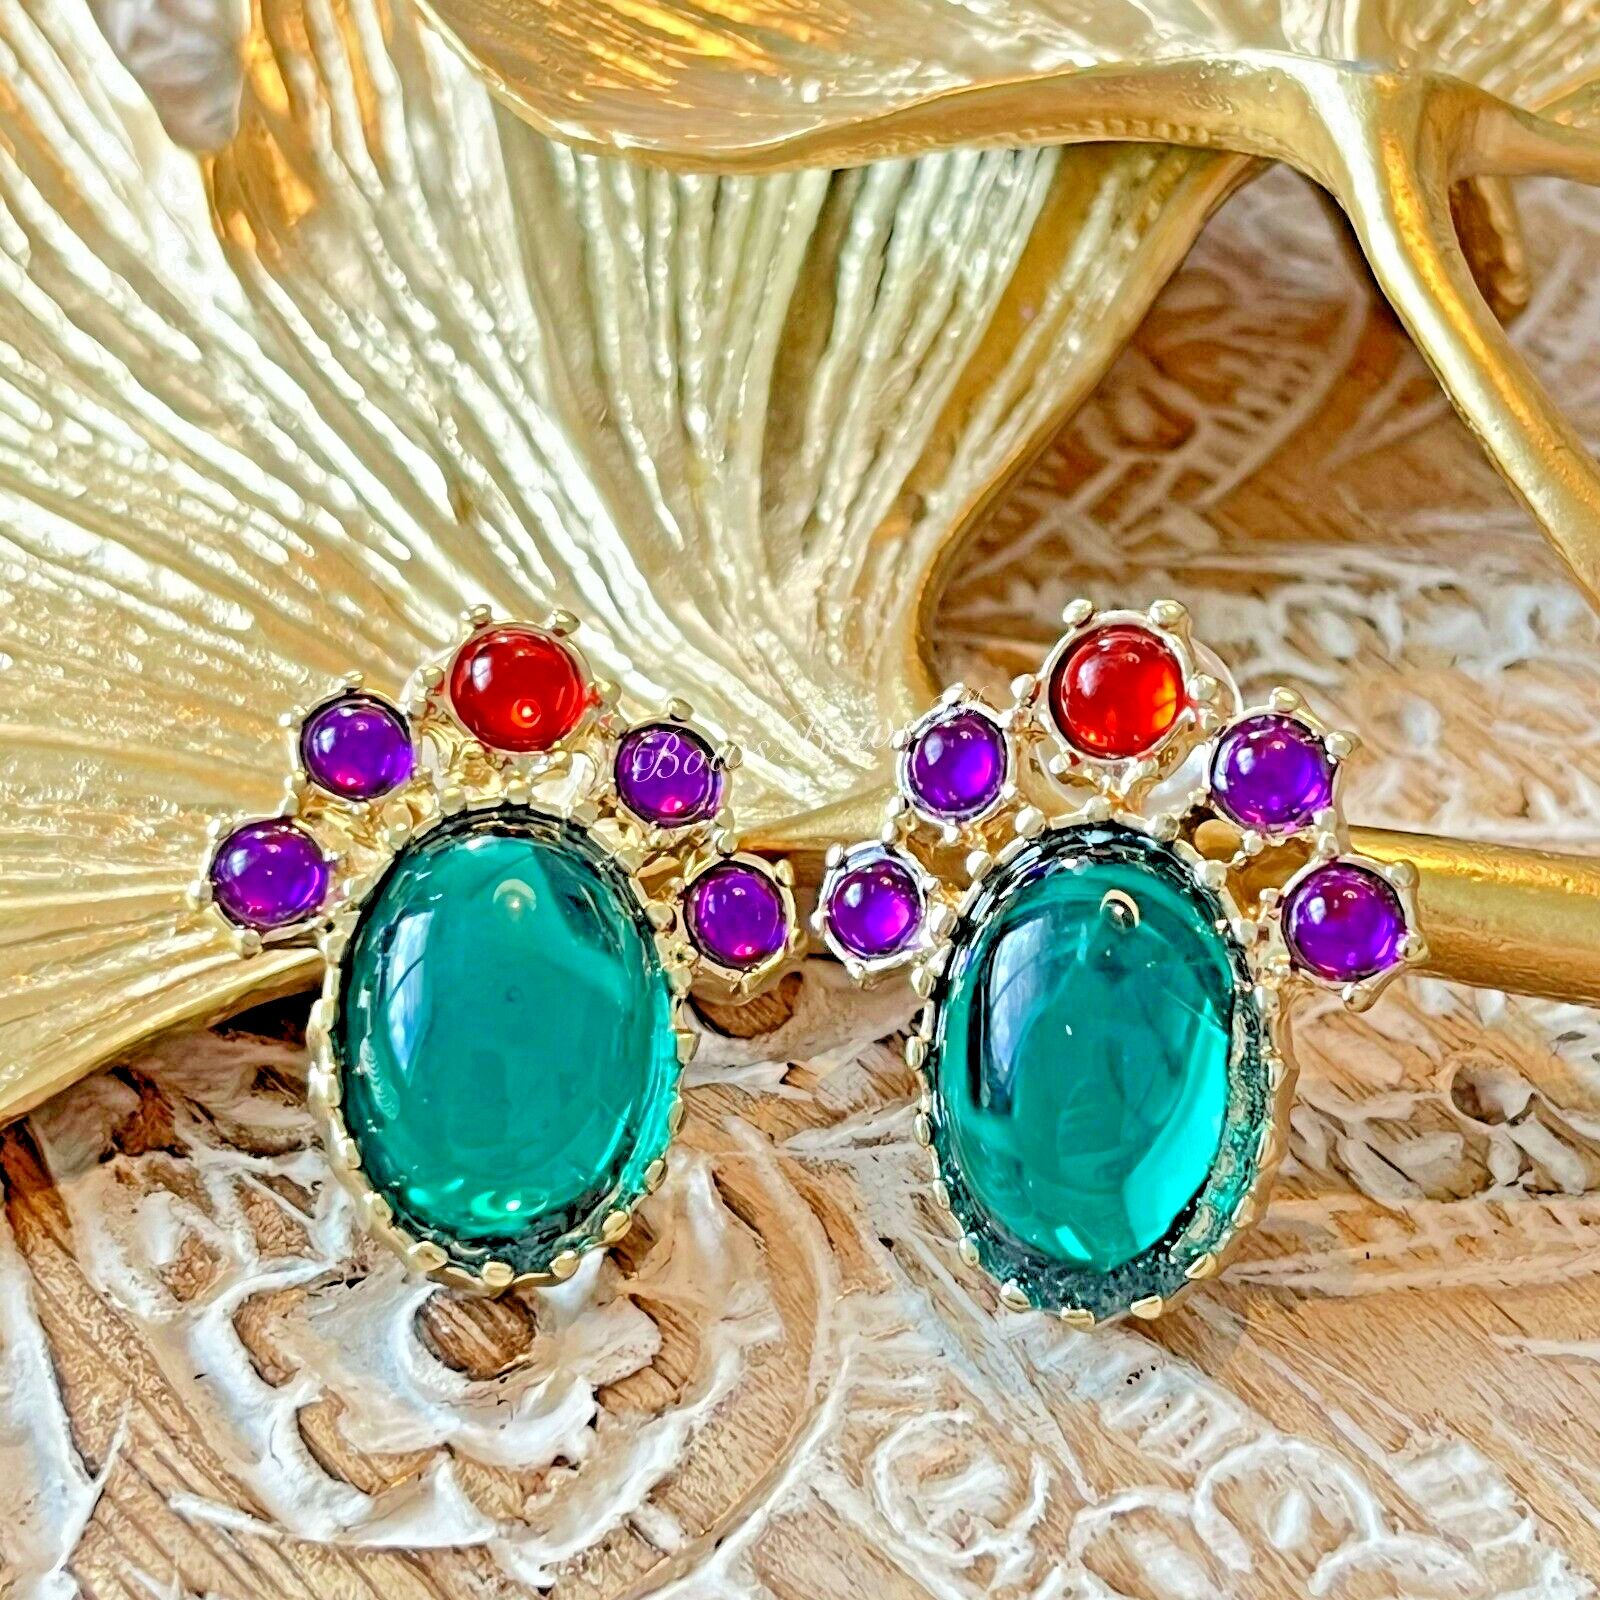 Brand NEW Vintage Gold Plated Resin Earring Silver Post Green/ Purple